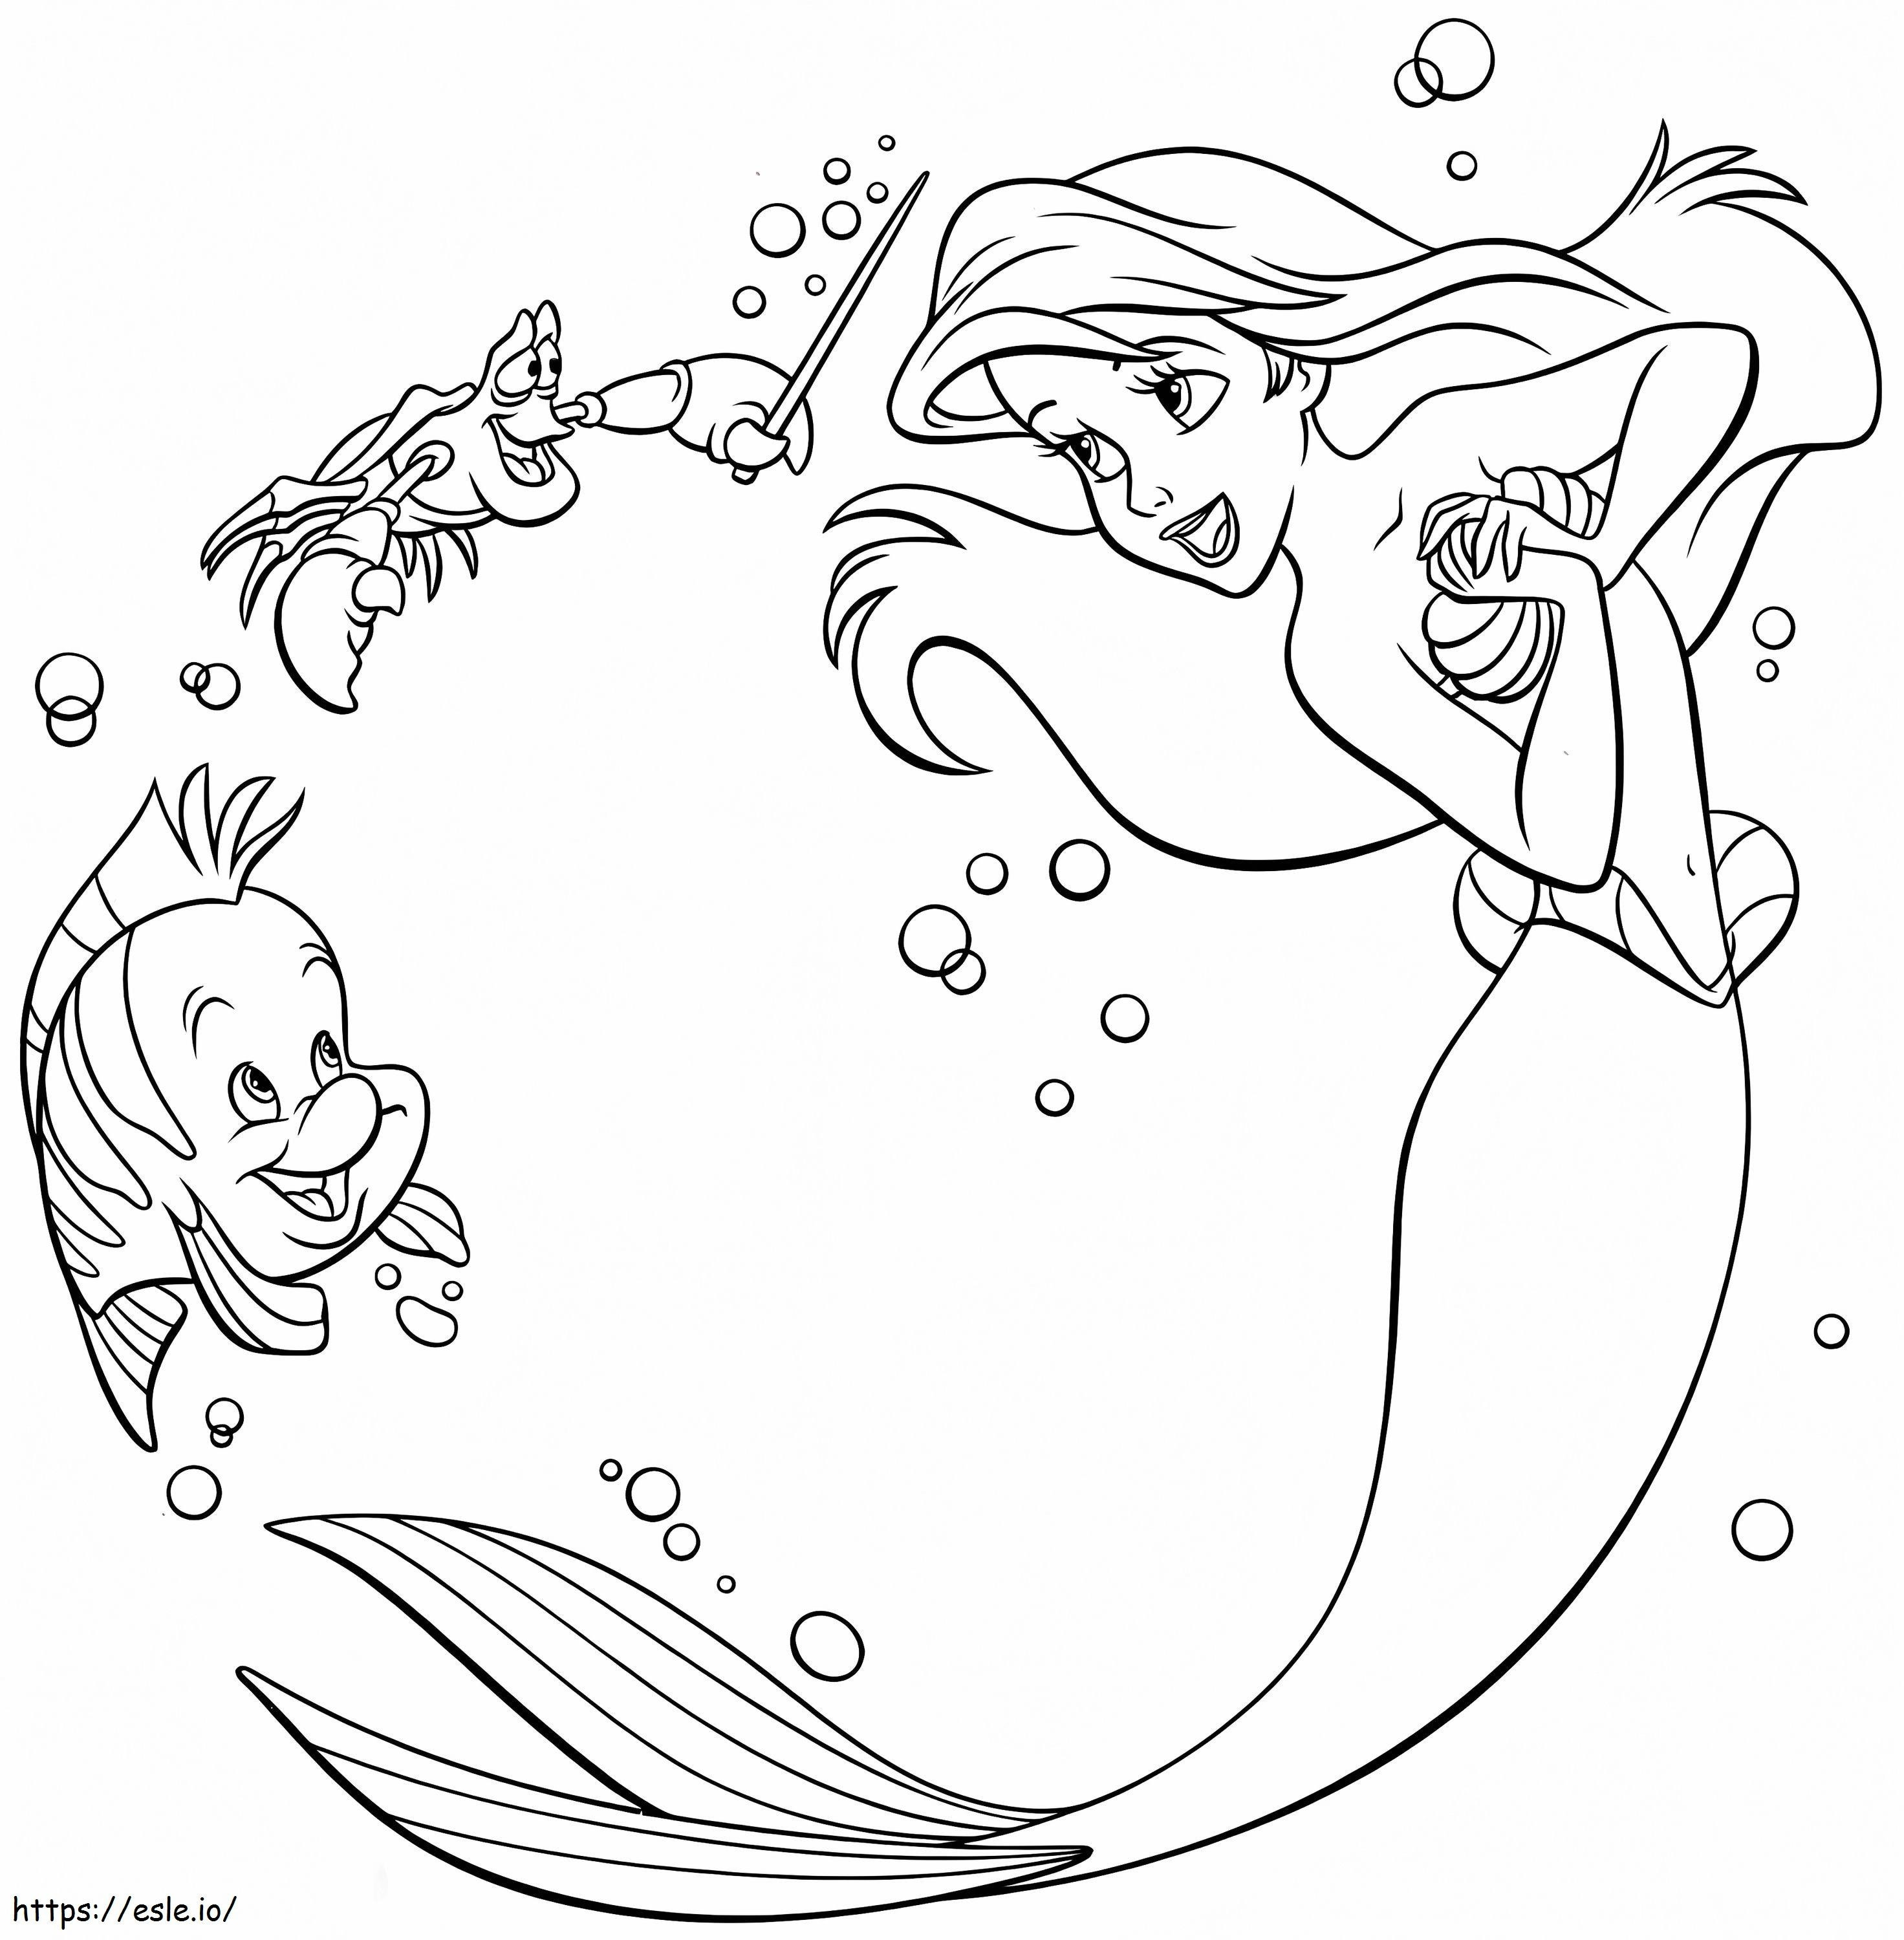 Ariel With Fish And Crab coloring page